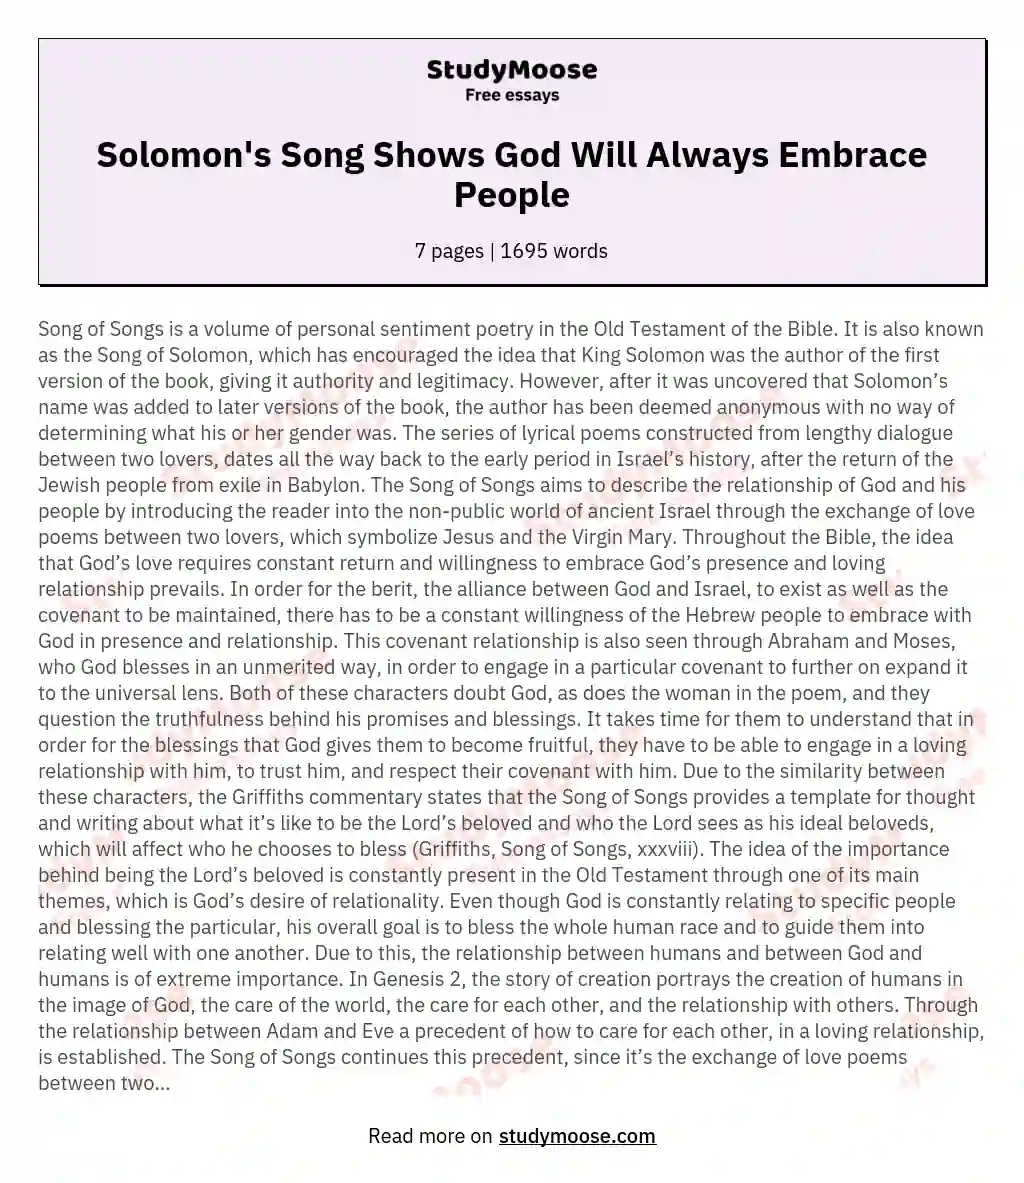 Solomon's Song Shows God Will Always Embrace People